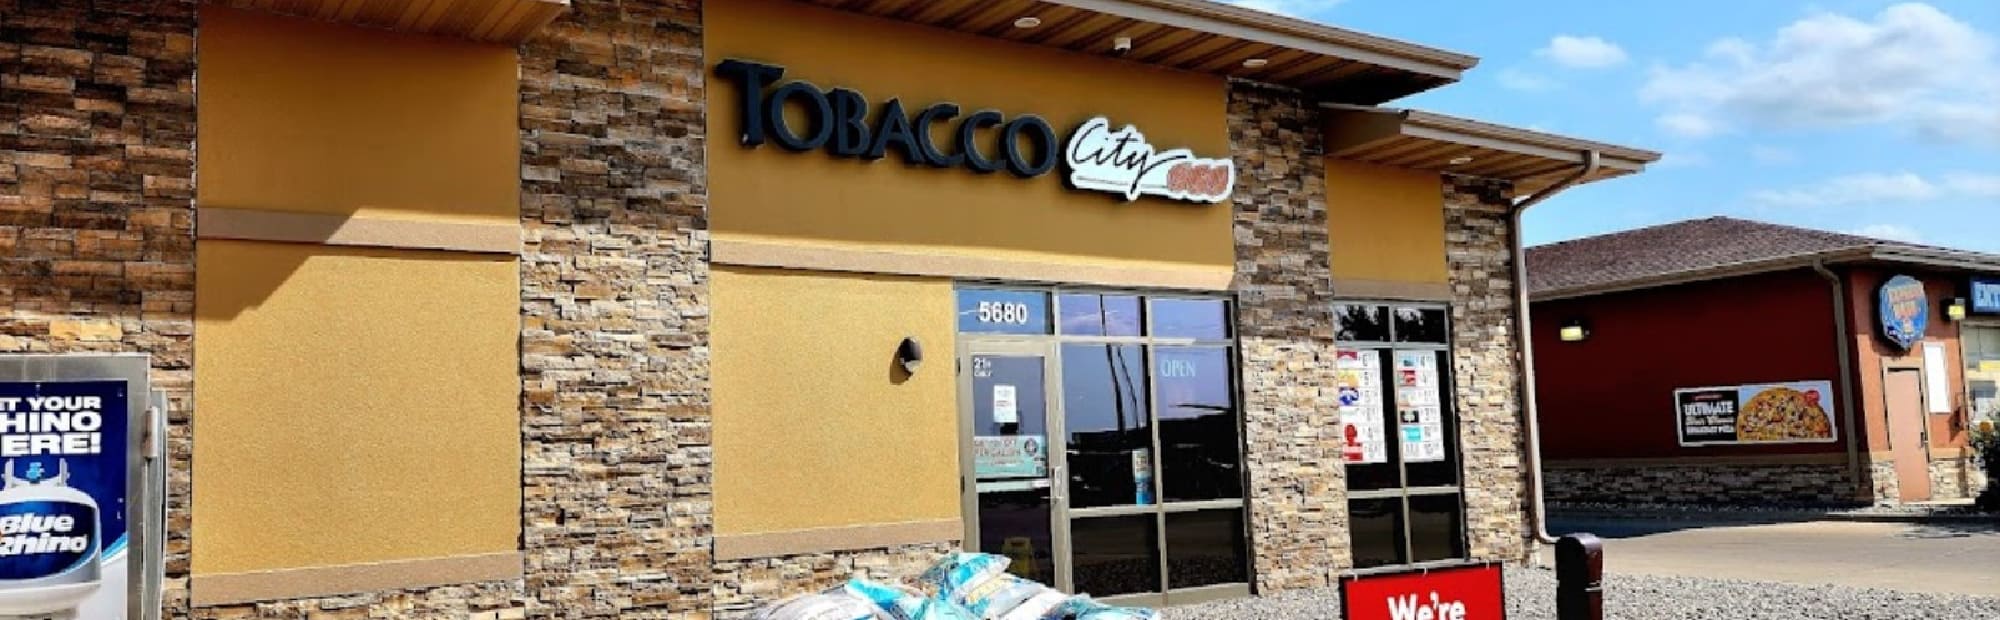 image of tobacco city in fargo nd